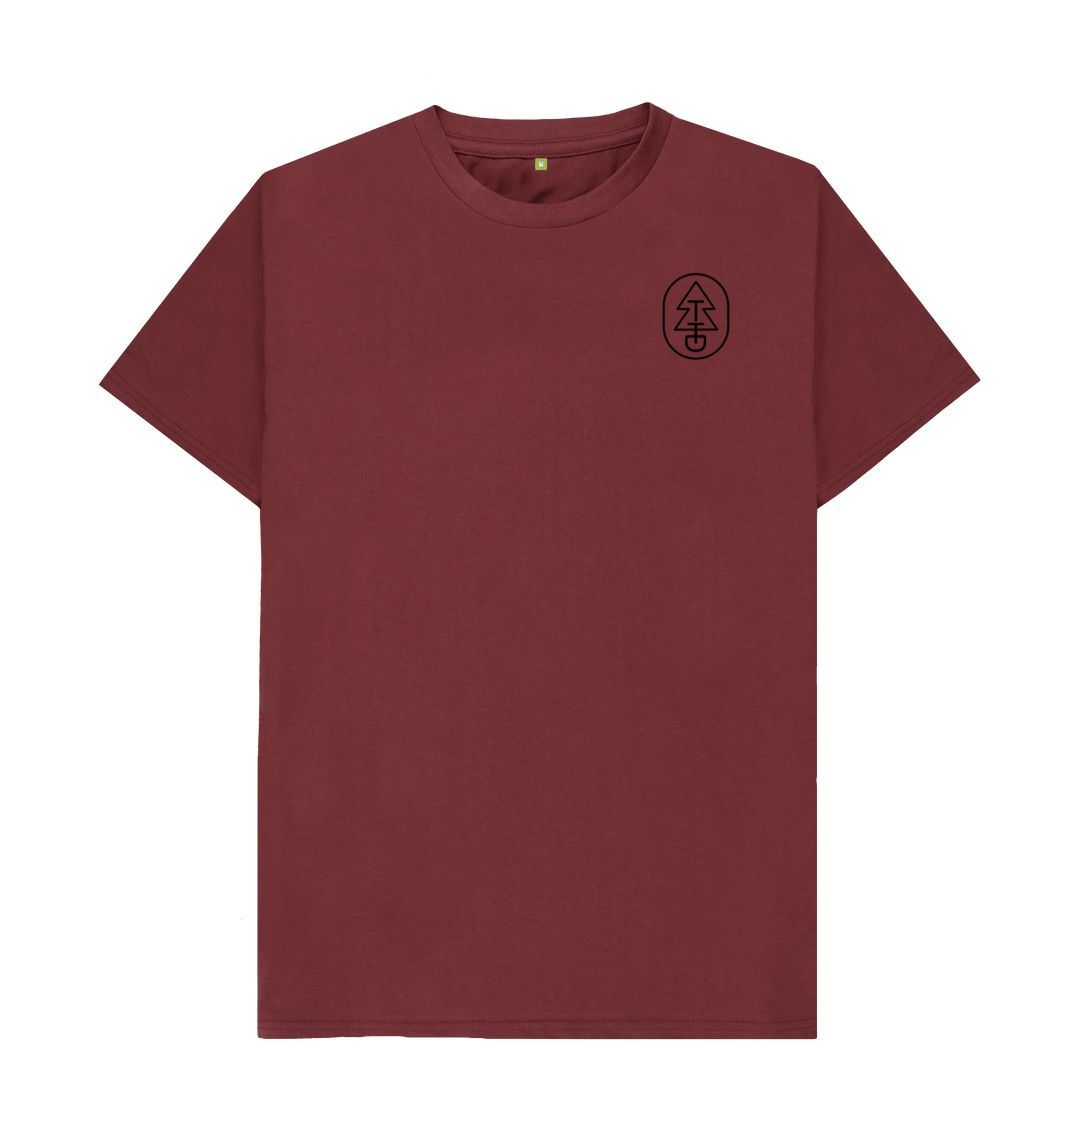 Red Wine Tree Tee - Channel Sunset